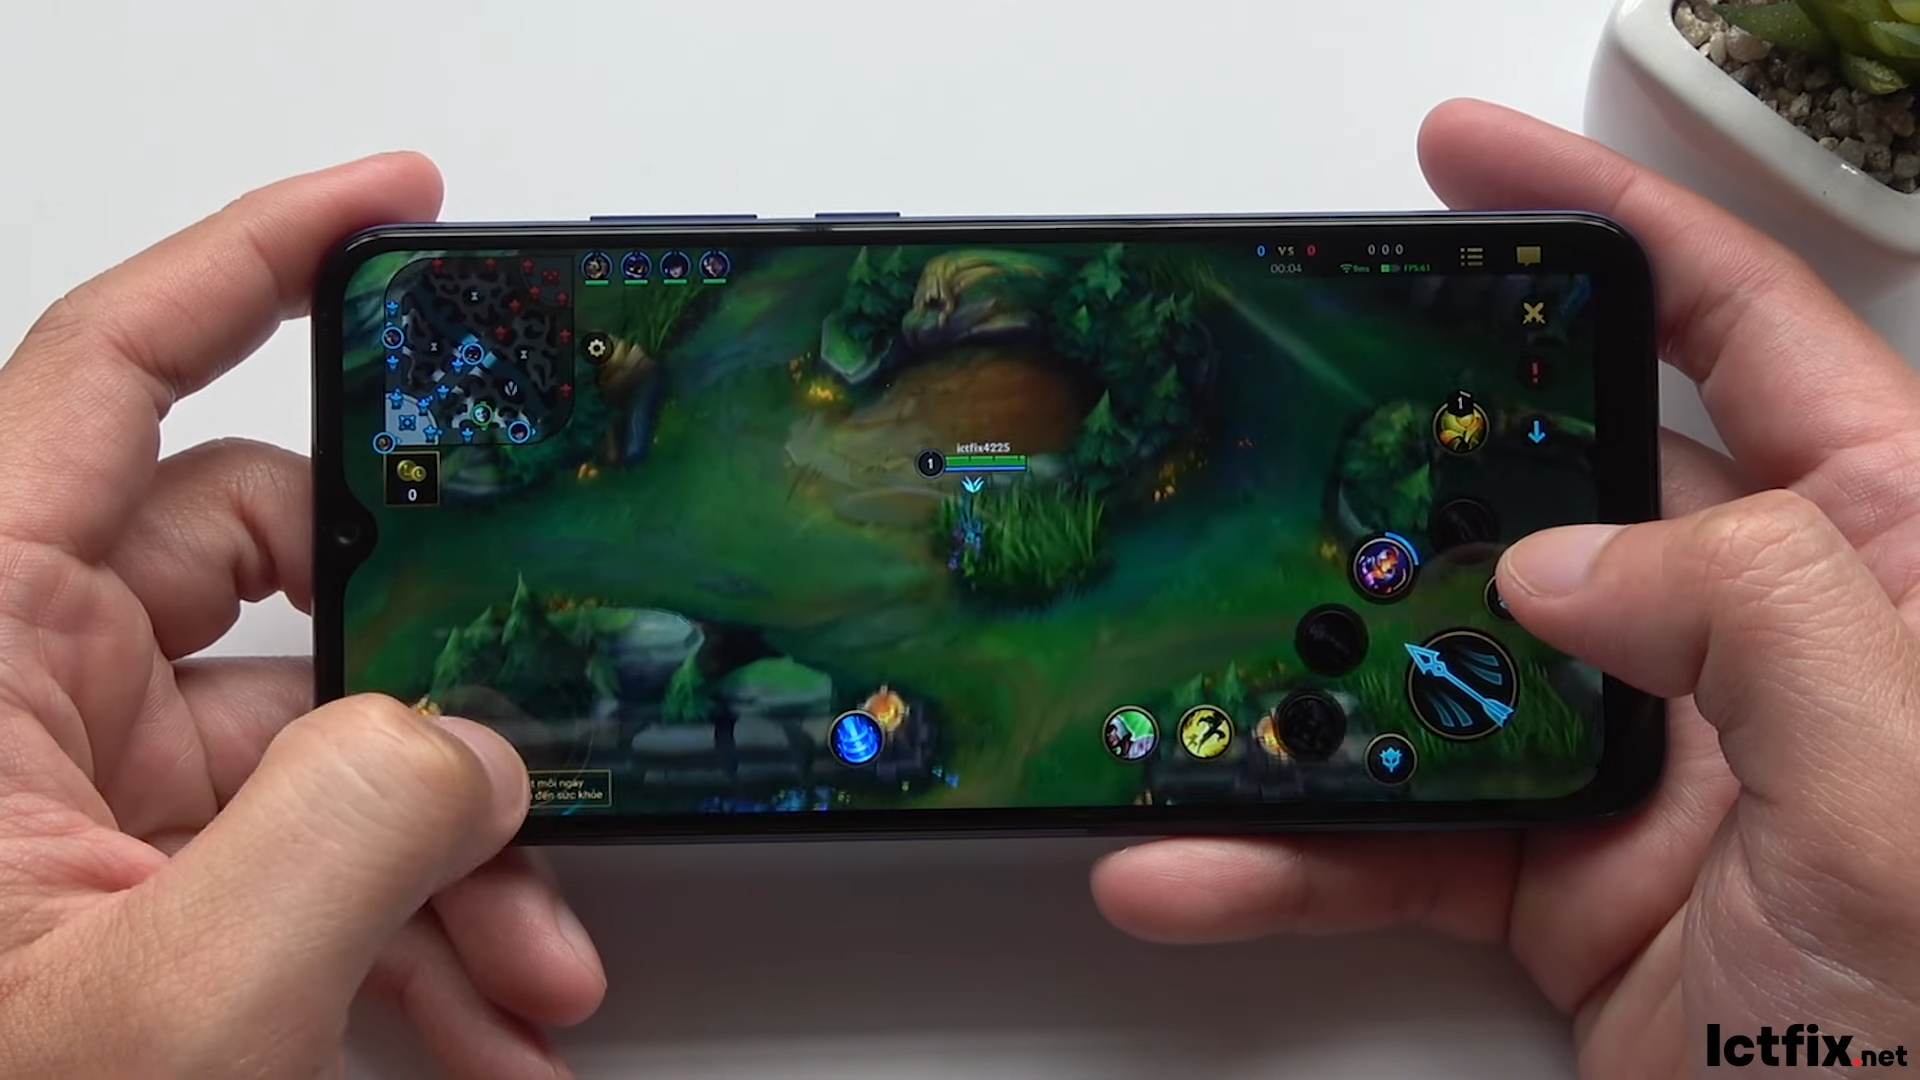 Samsung Galaxy A03 Mobile Legends Gaming test